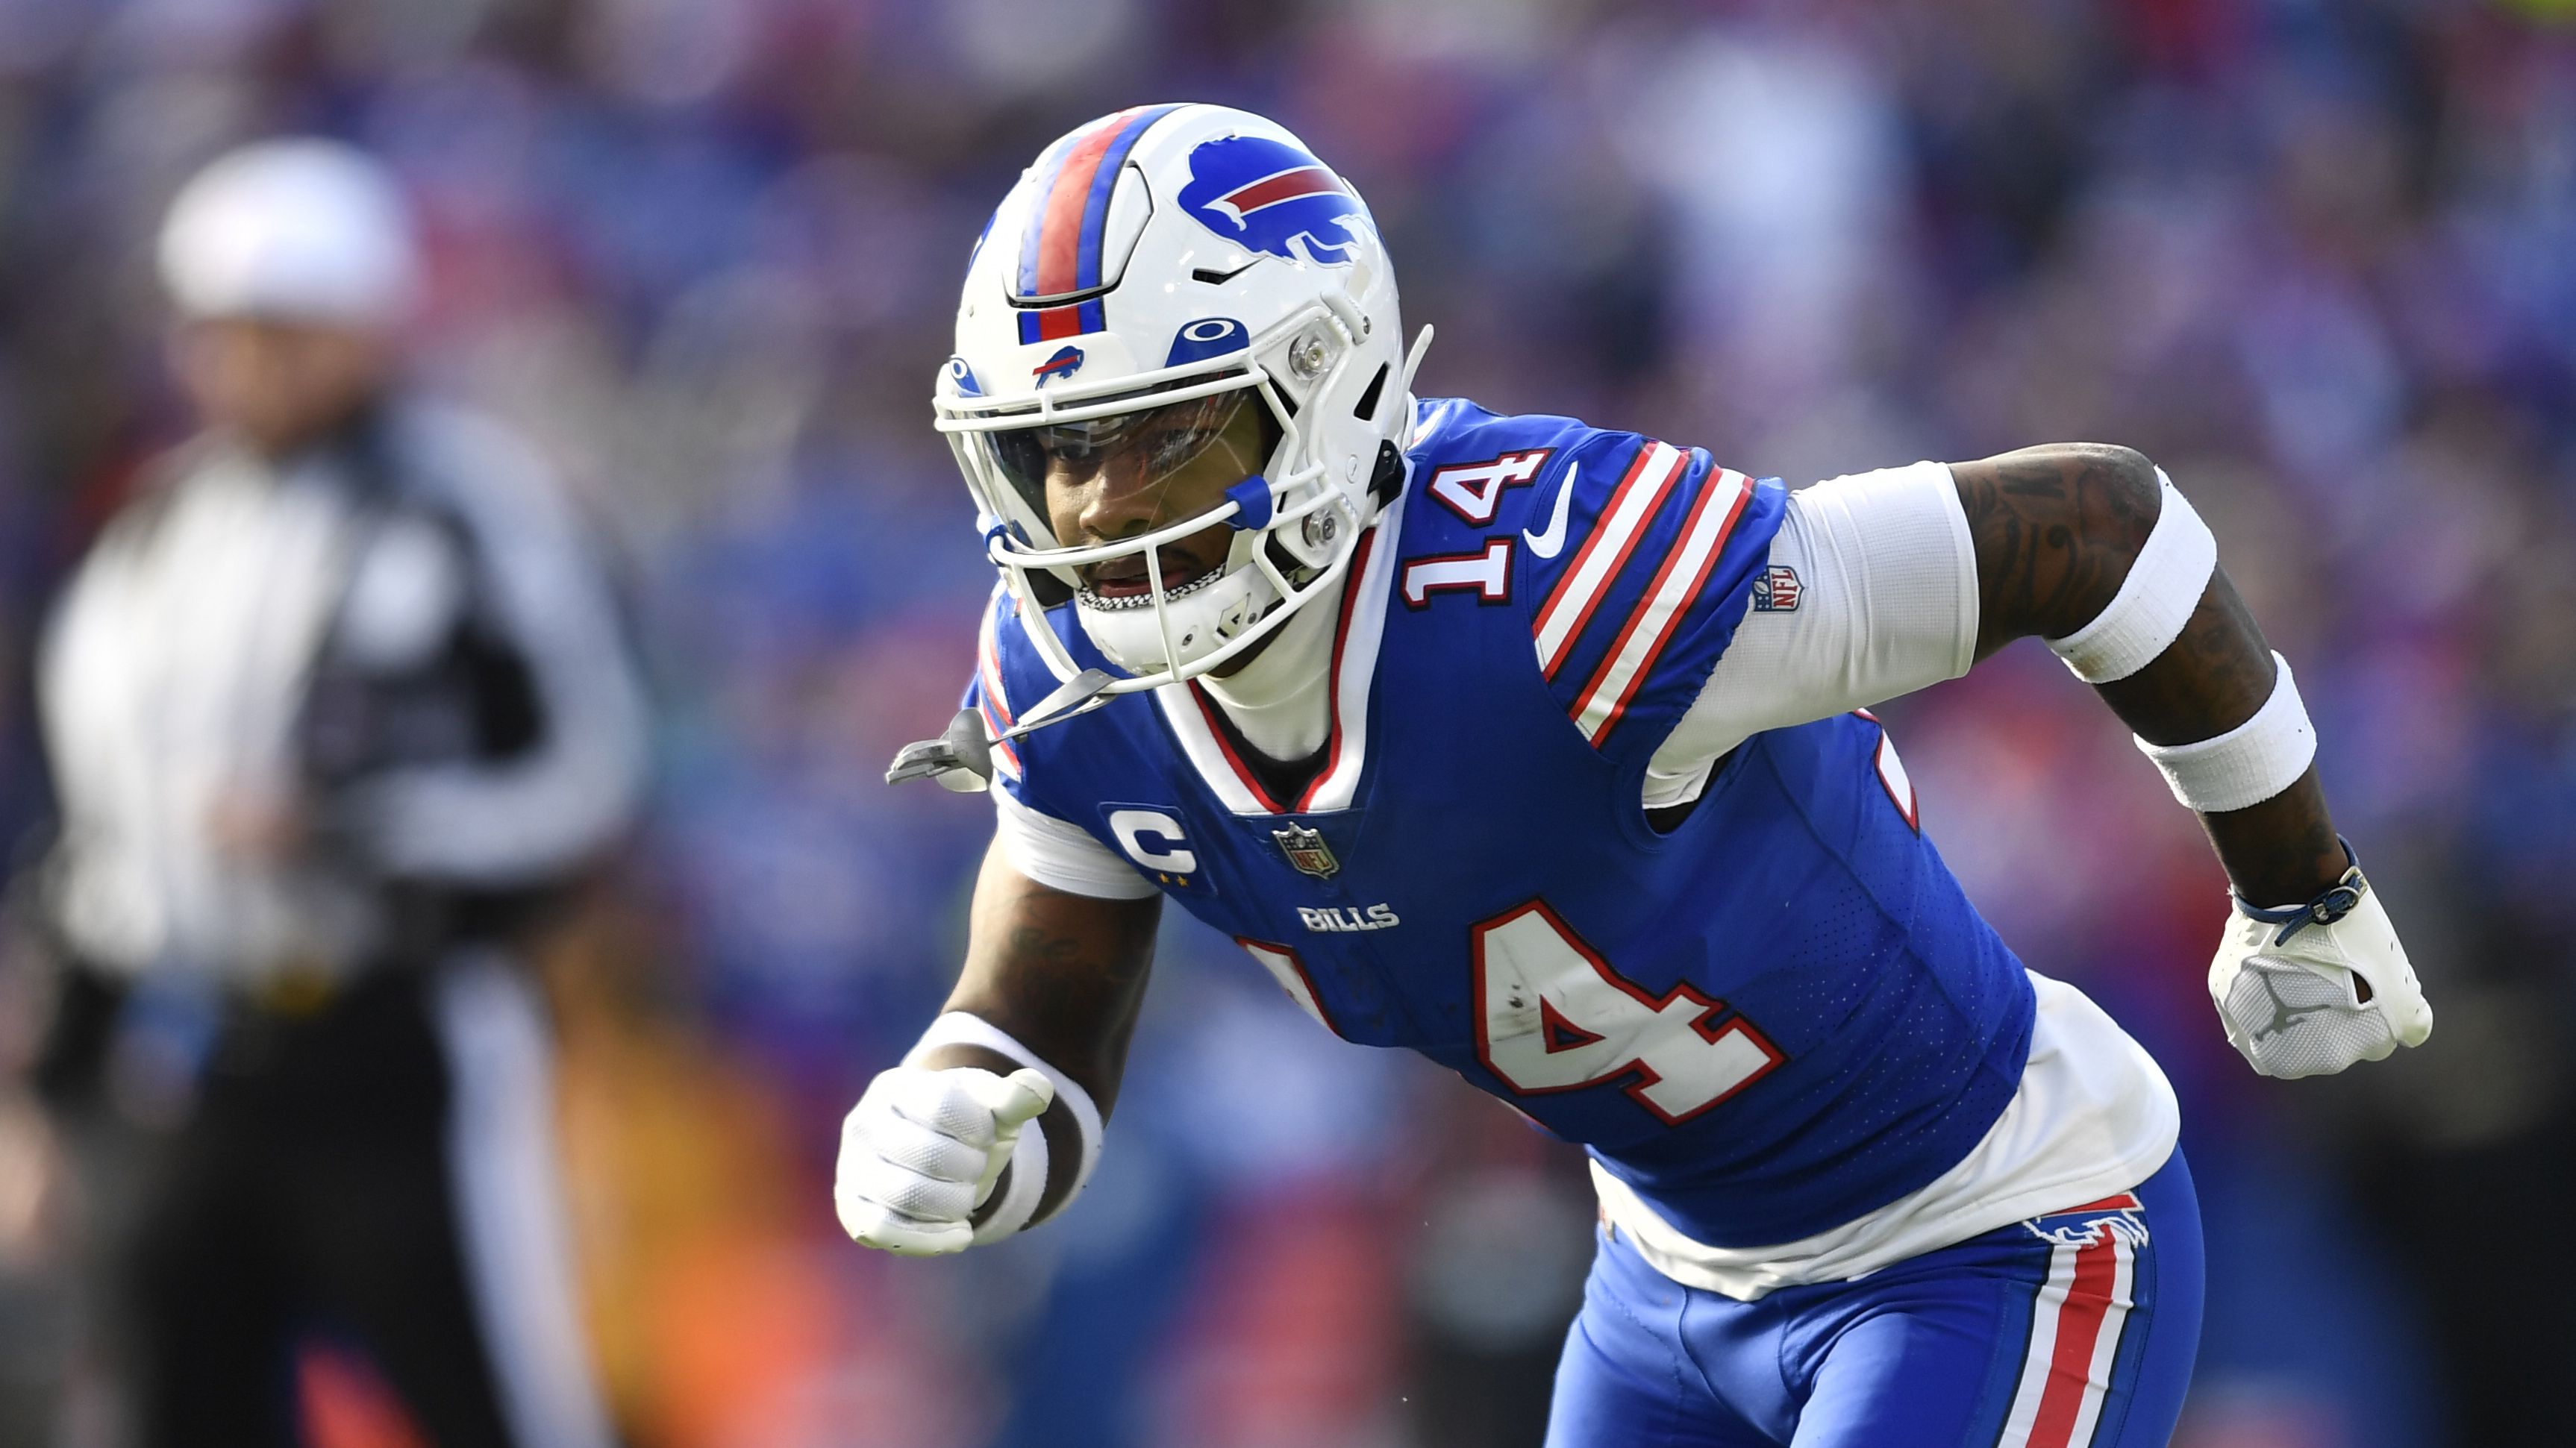 God is real,' says Buffalo Bills QB Josh Allen after game honoring